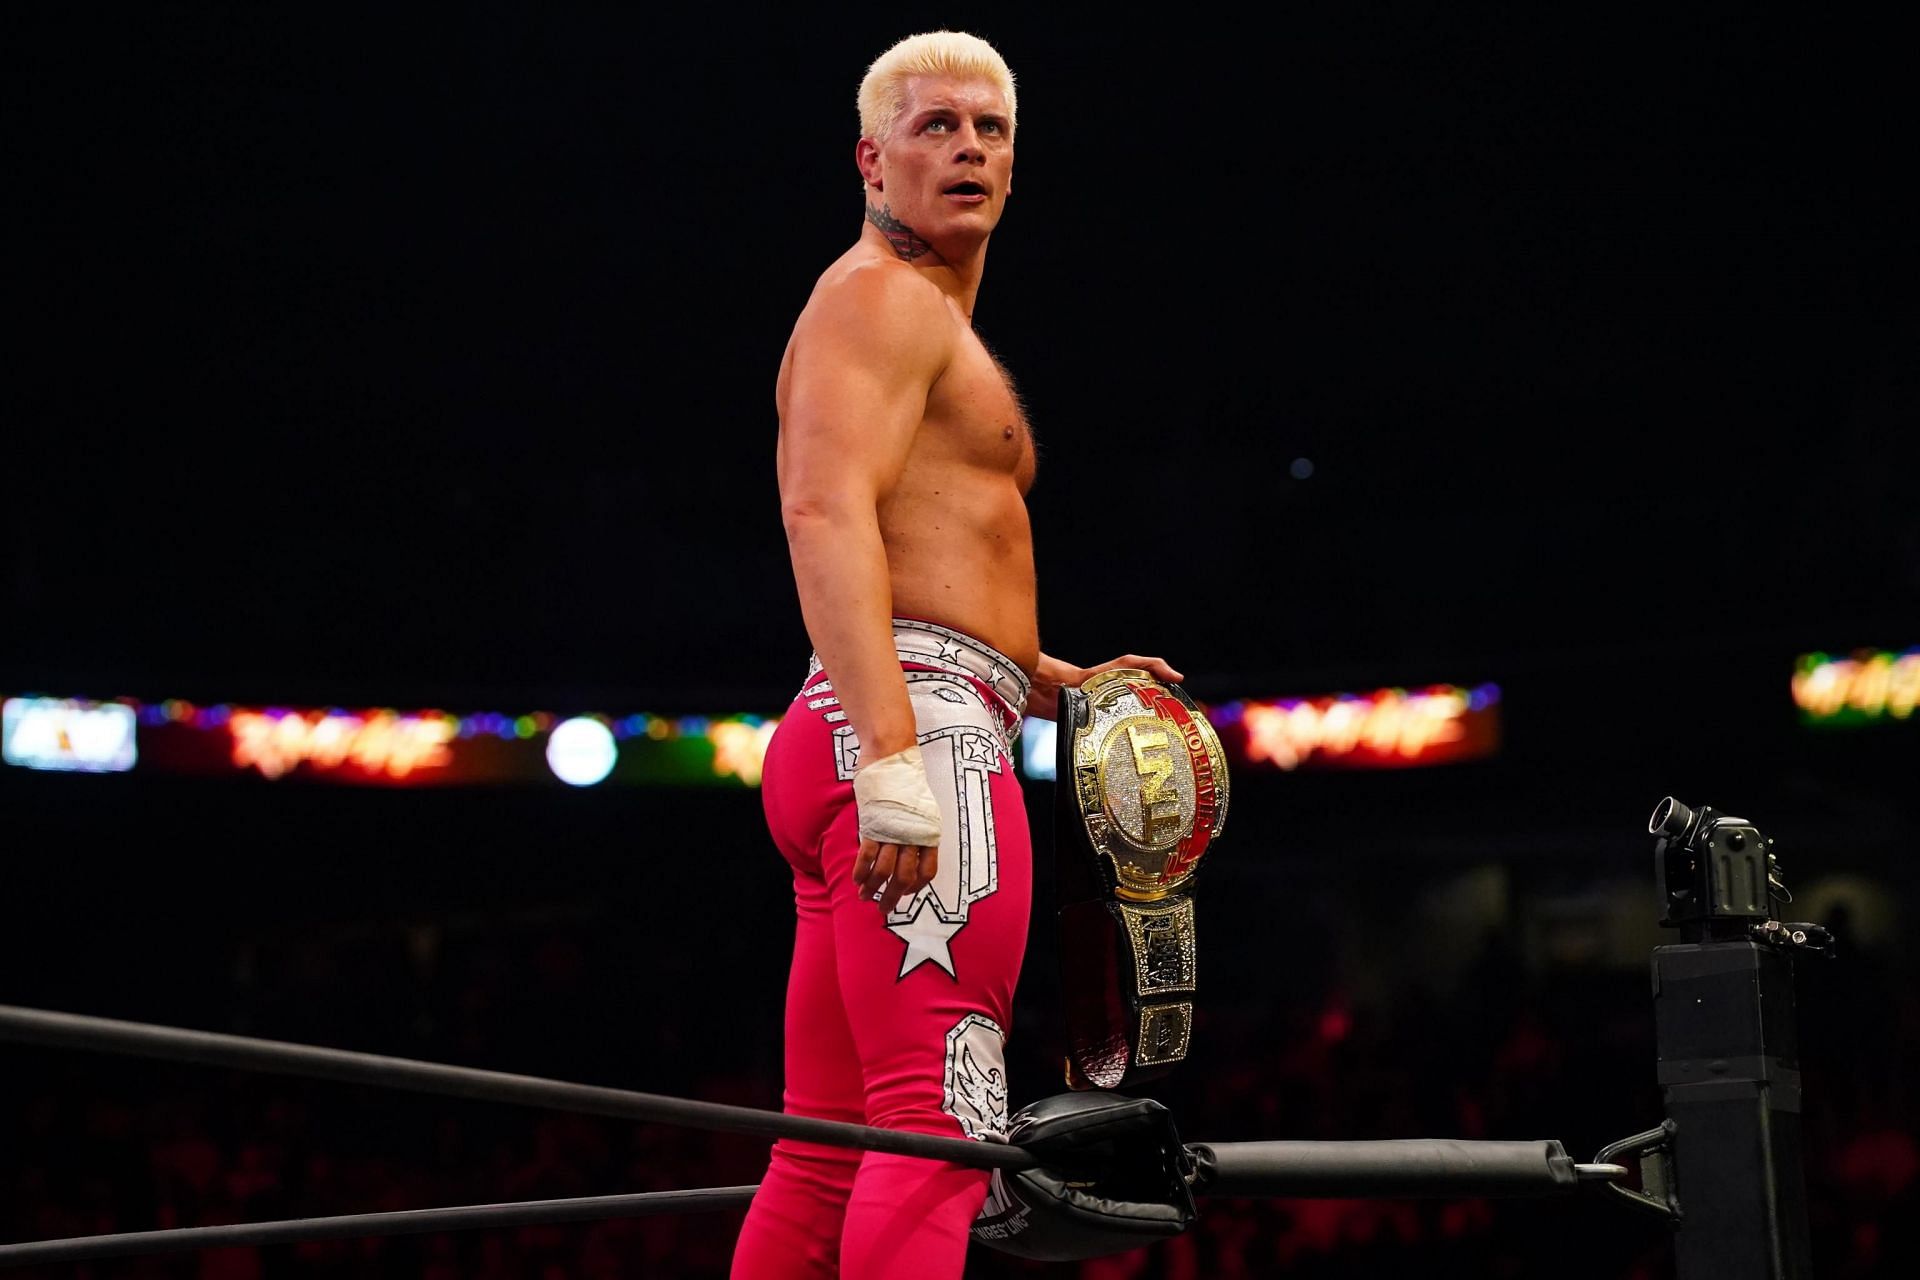 Cody Rhodes is a 3-time TNT Champion